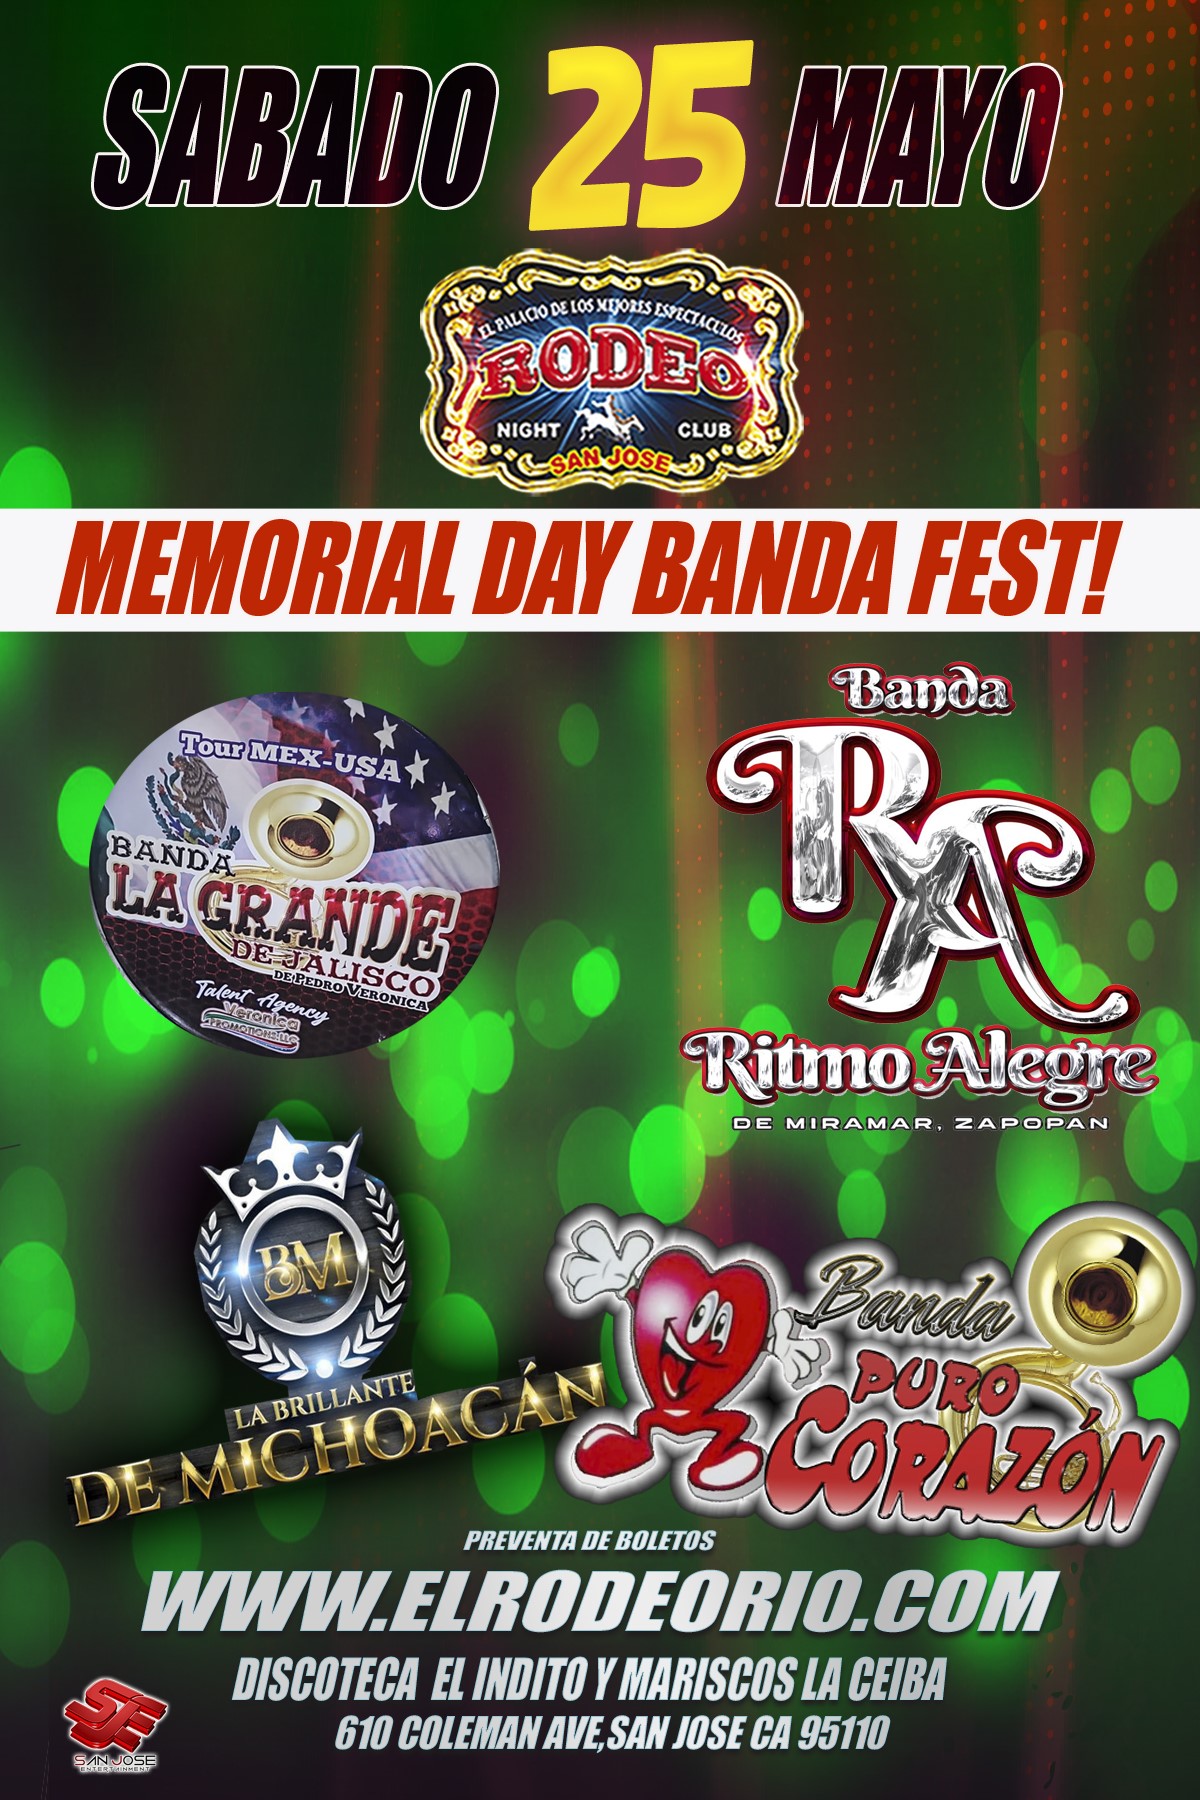 Memorial Day Banda Fest!  on May 25, 21:00@Club Rodeo - Buy tickets and Get information on elrodeorio.com sanjoseentertainment